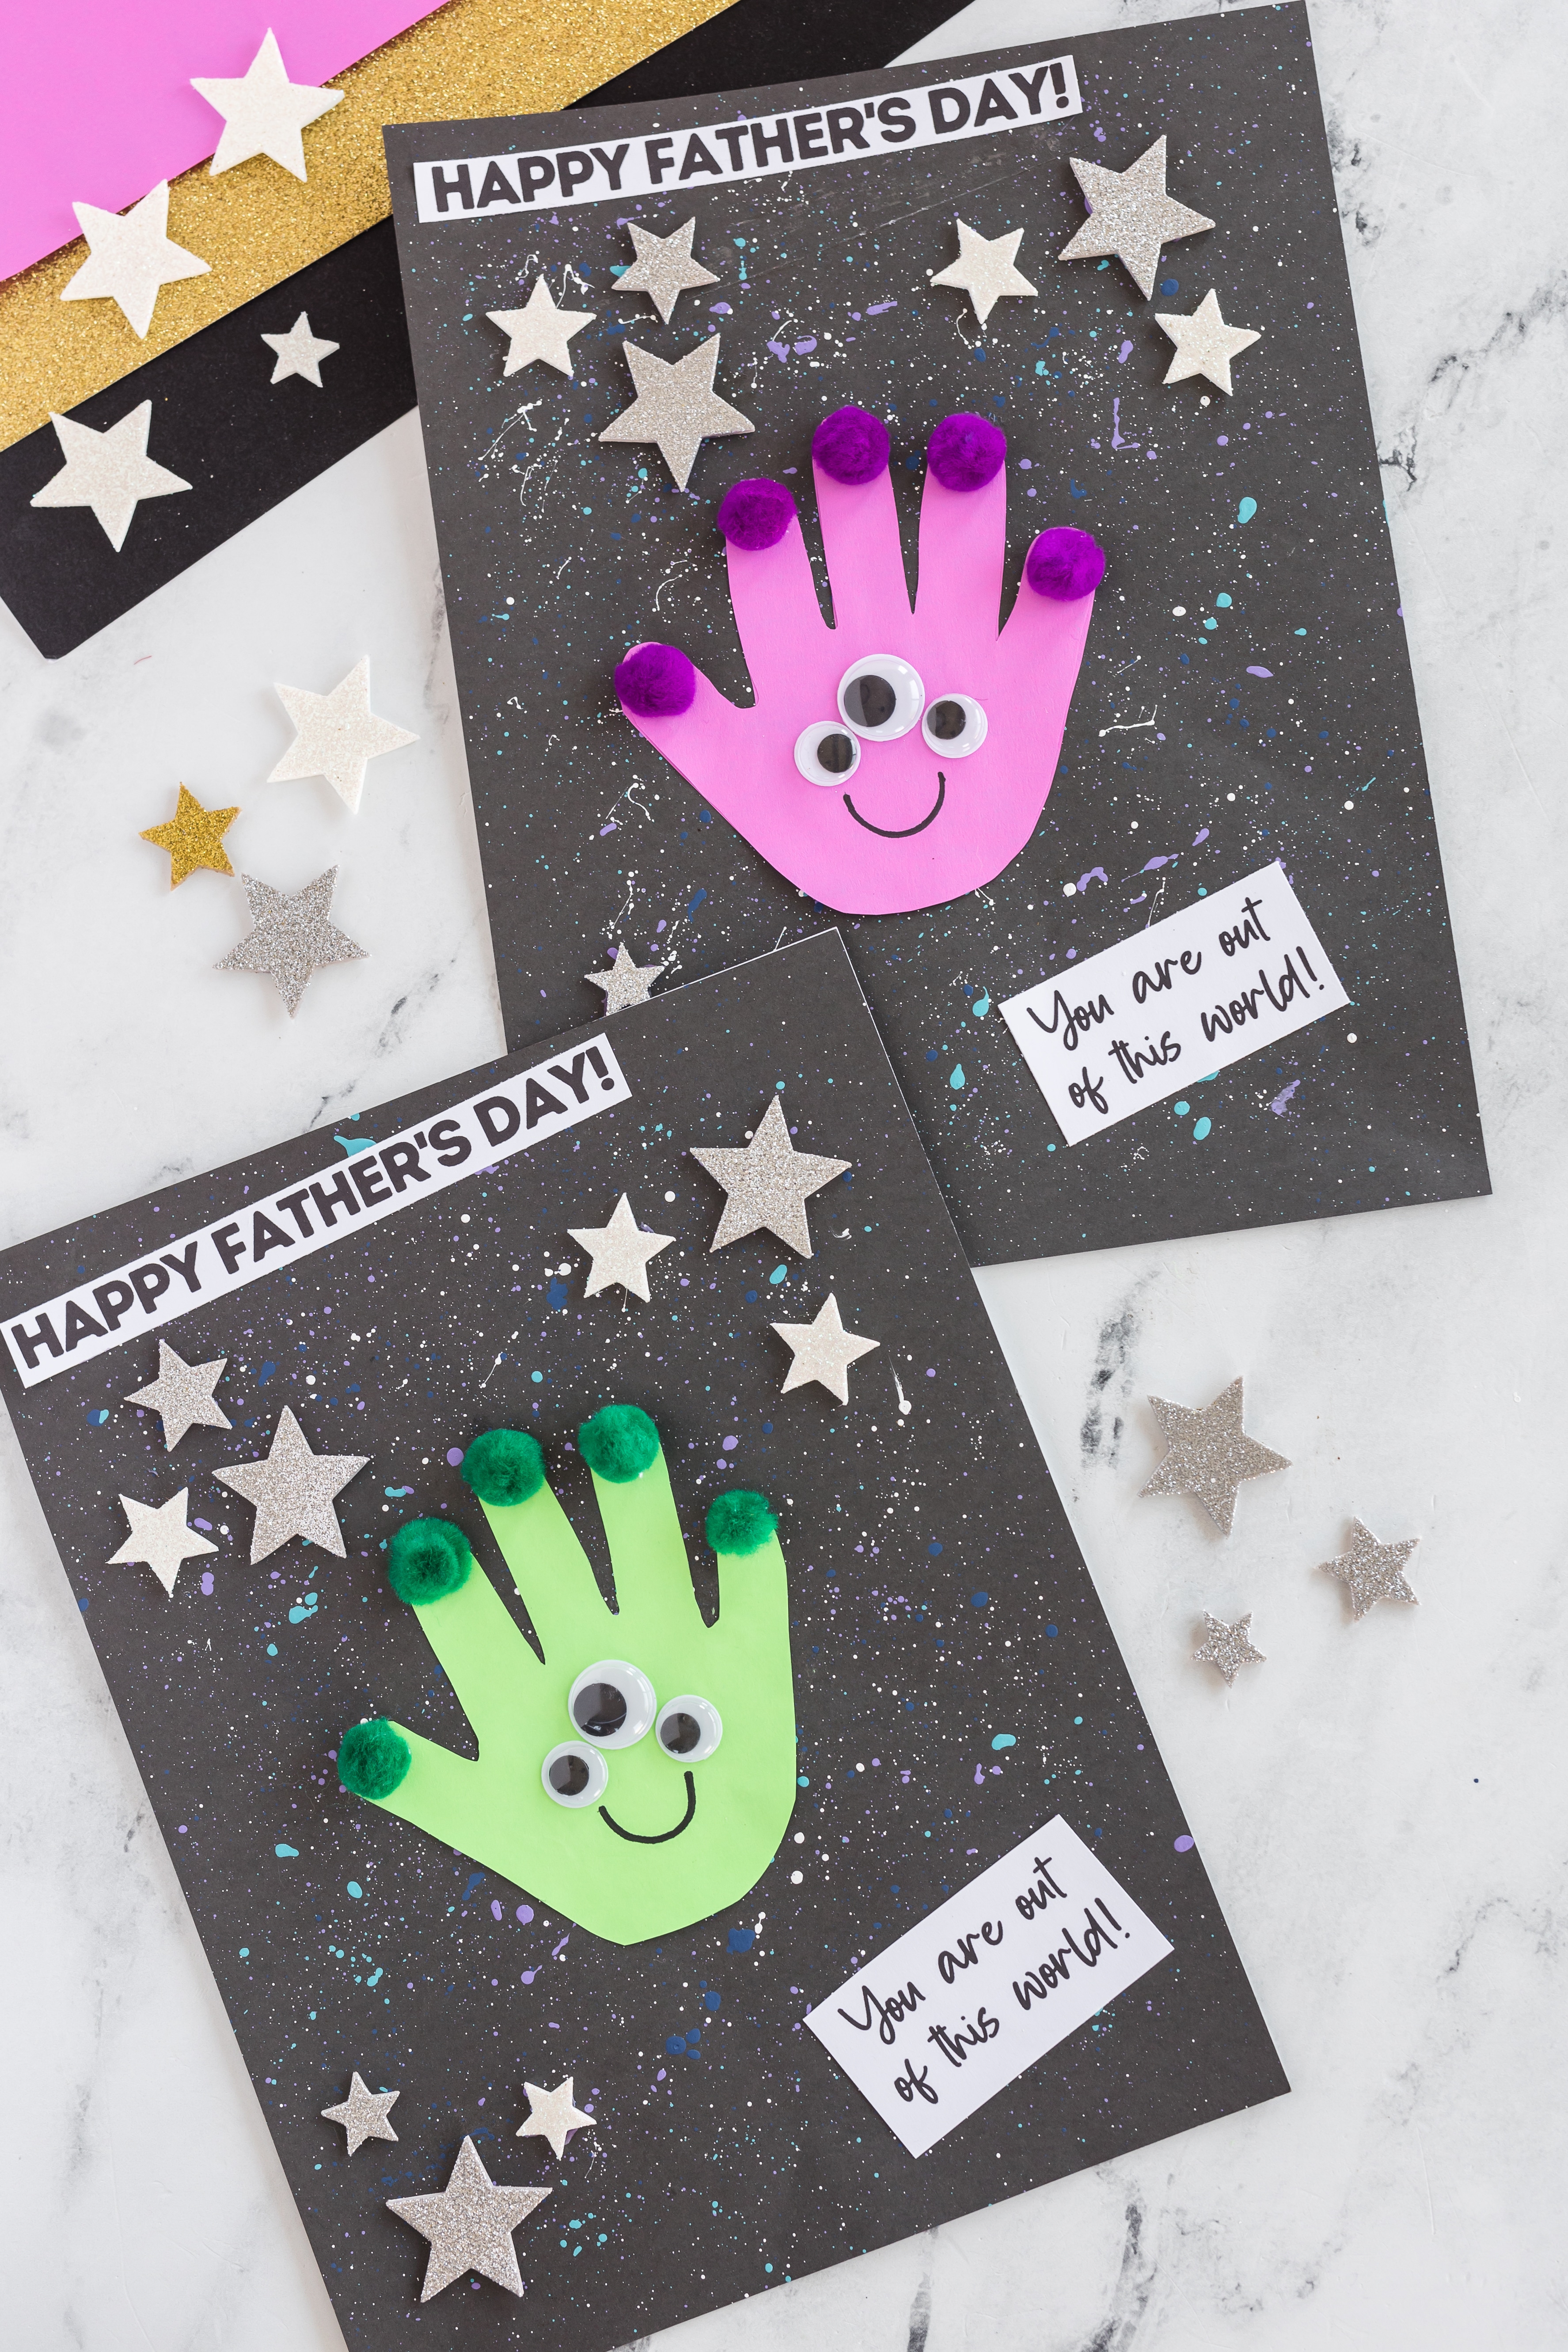 Handprint Alien Craft - Father's Day Craft in purple and green